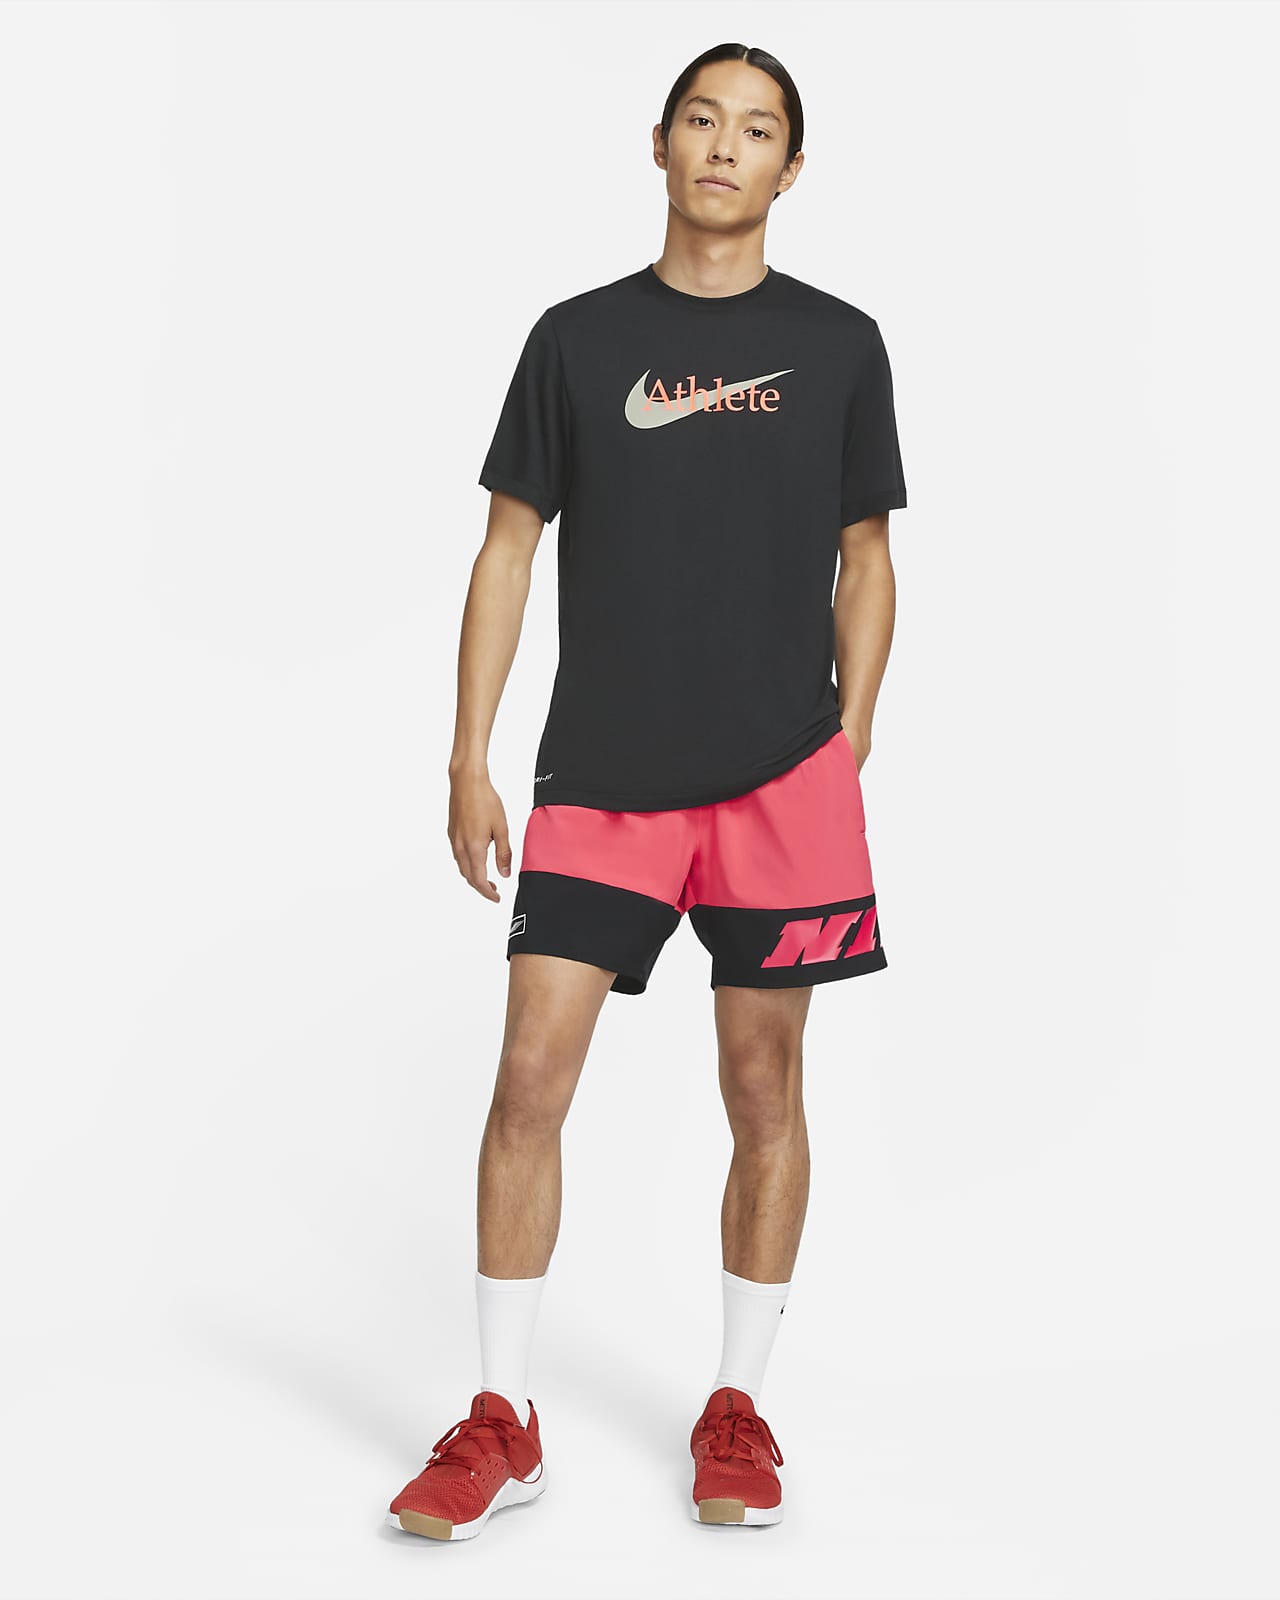 sport outfit nike